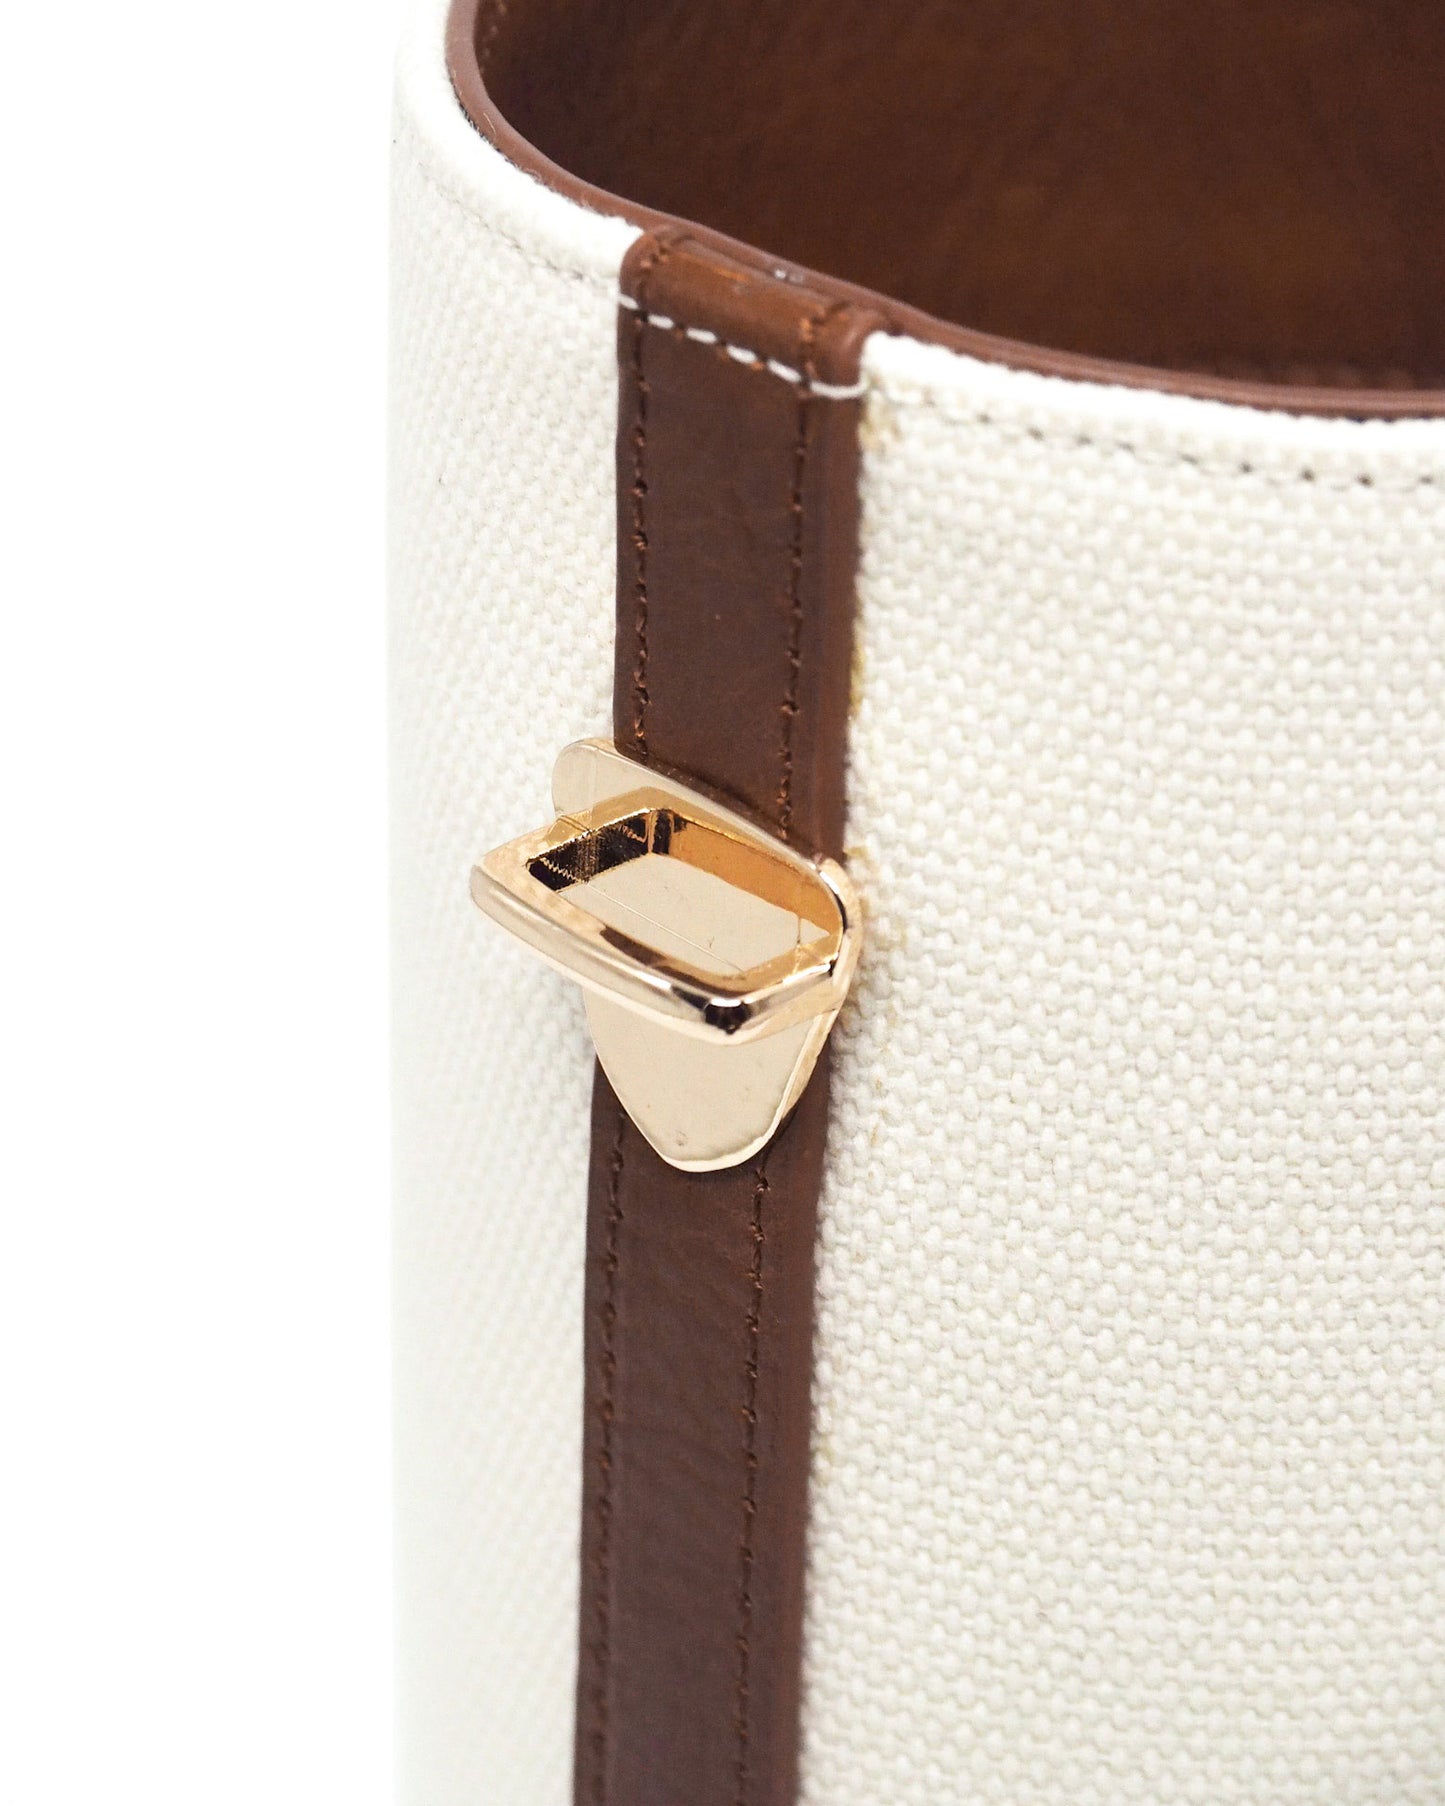 Heavy-Weight Canvas Wine Carrier (Ivory/ Cognac)